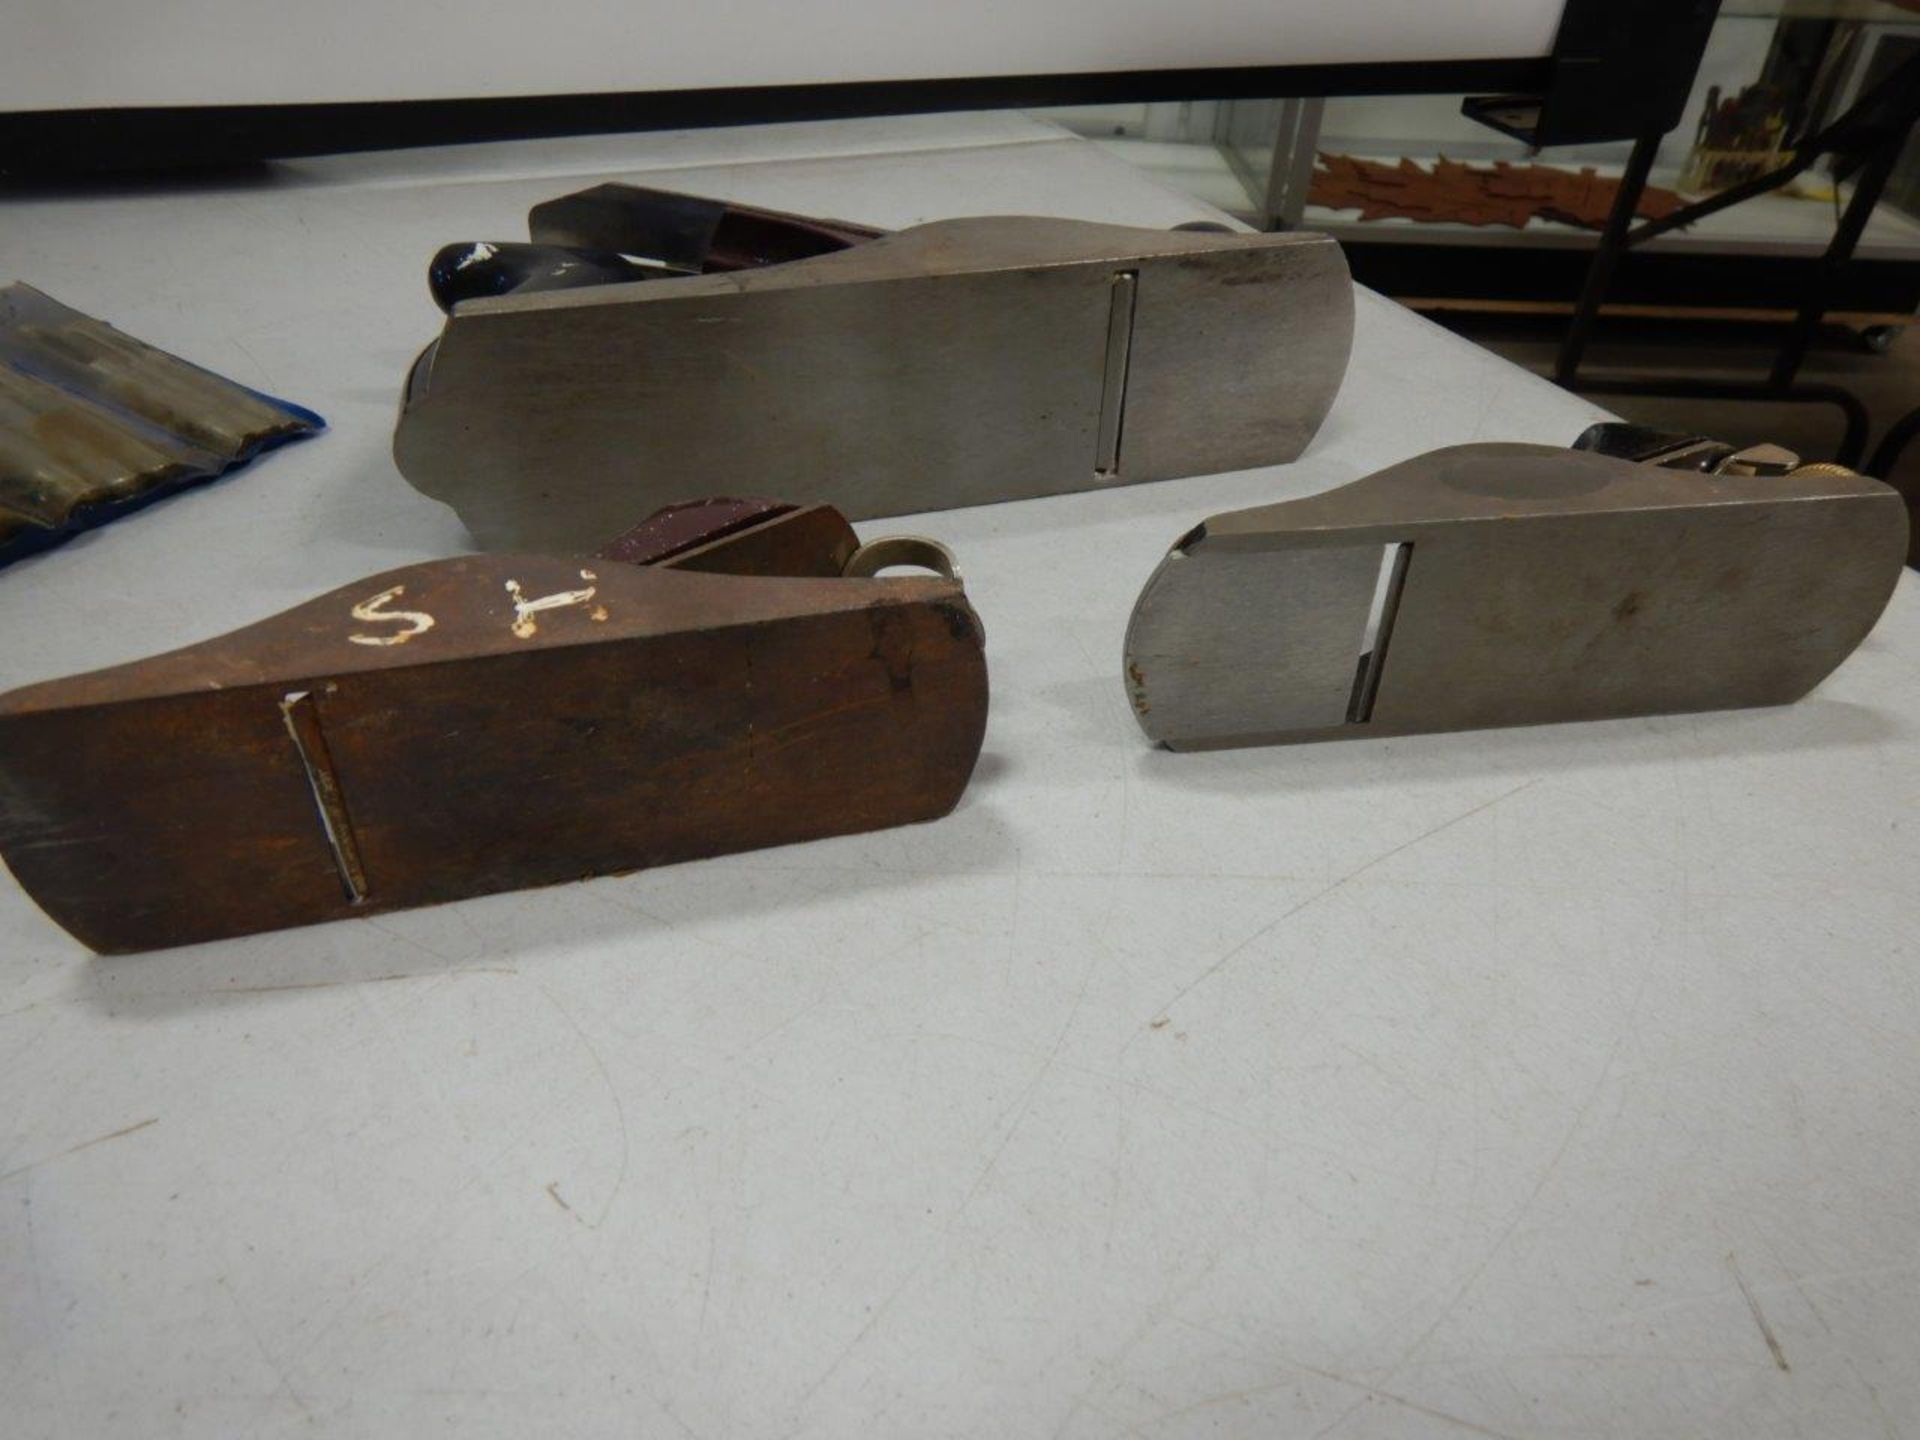 2-STANLEY BLOCK PLANES, 1-JACK PLANE, SHARPENING STONE, AND PUNCH SET - Image 3 of 3